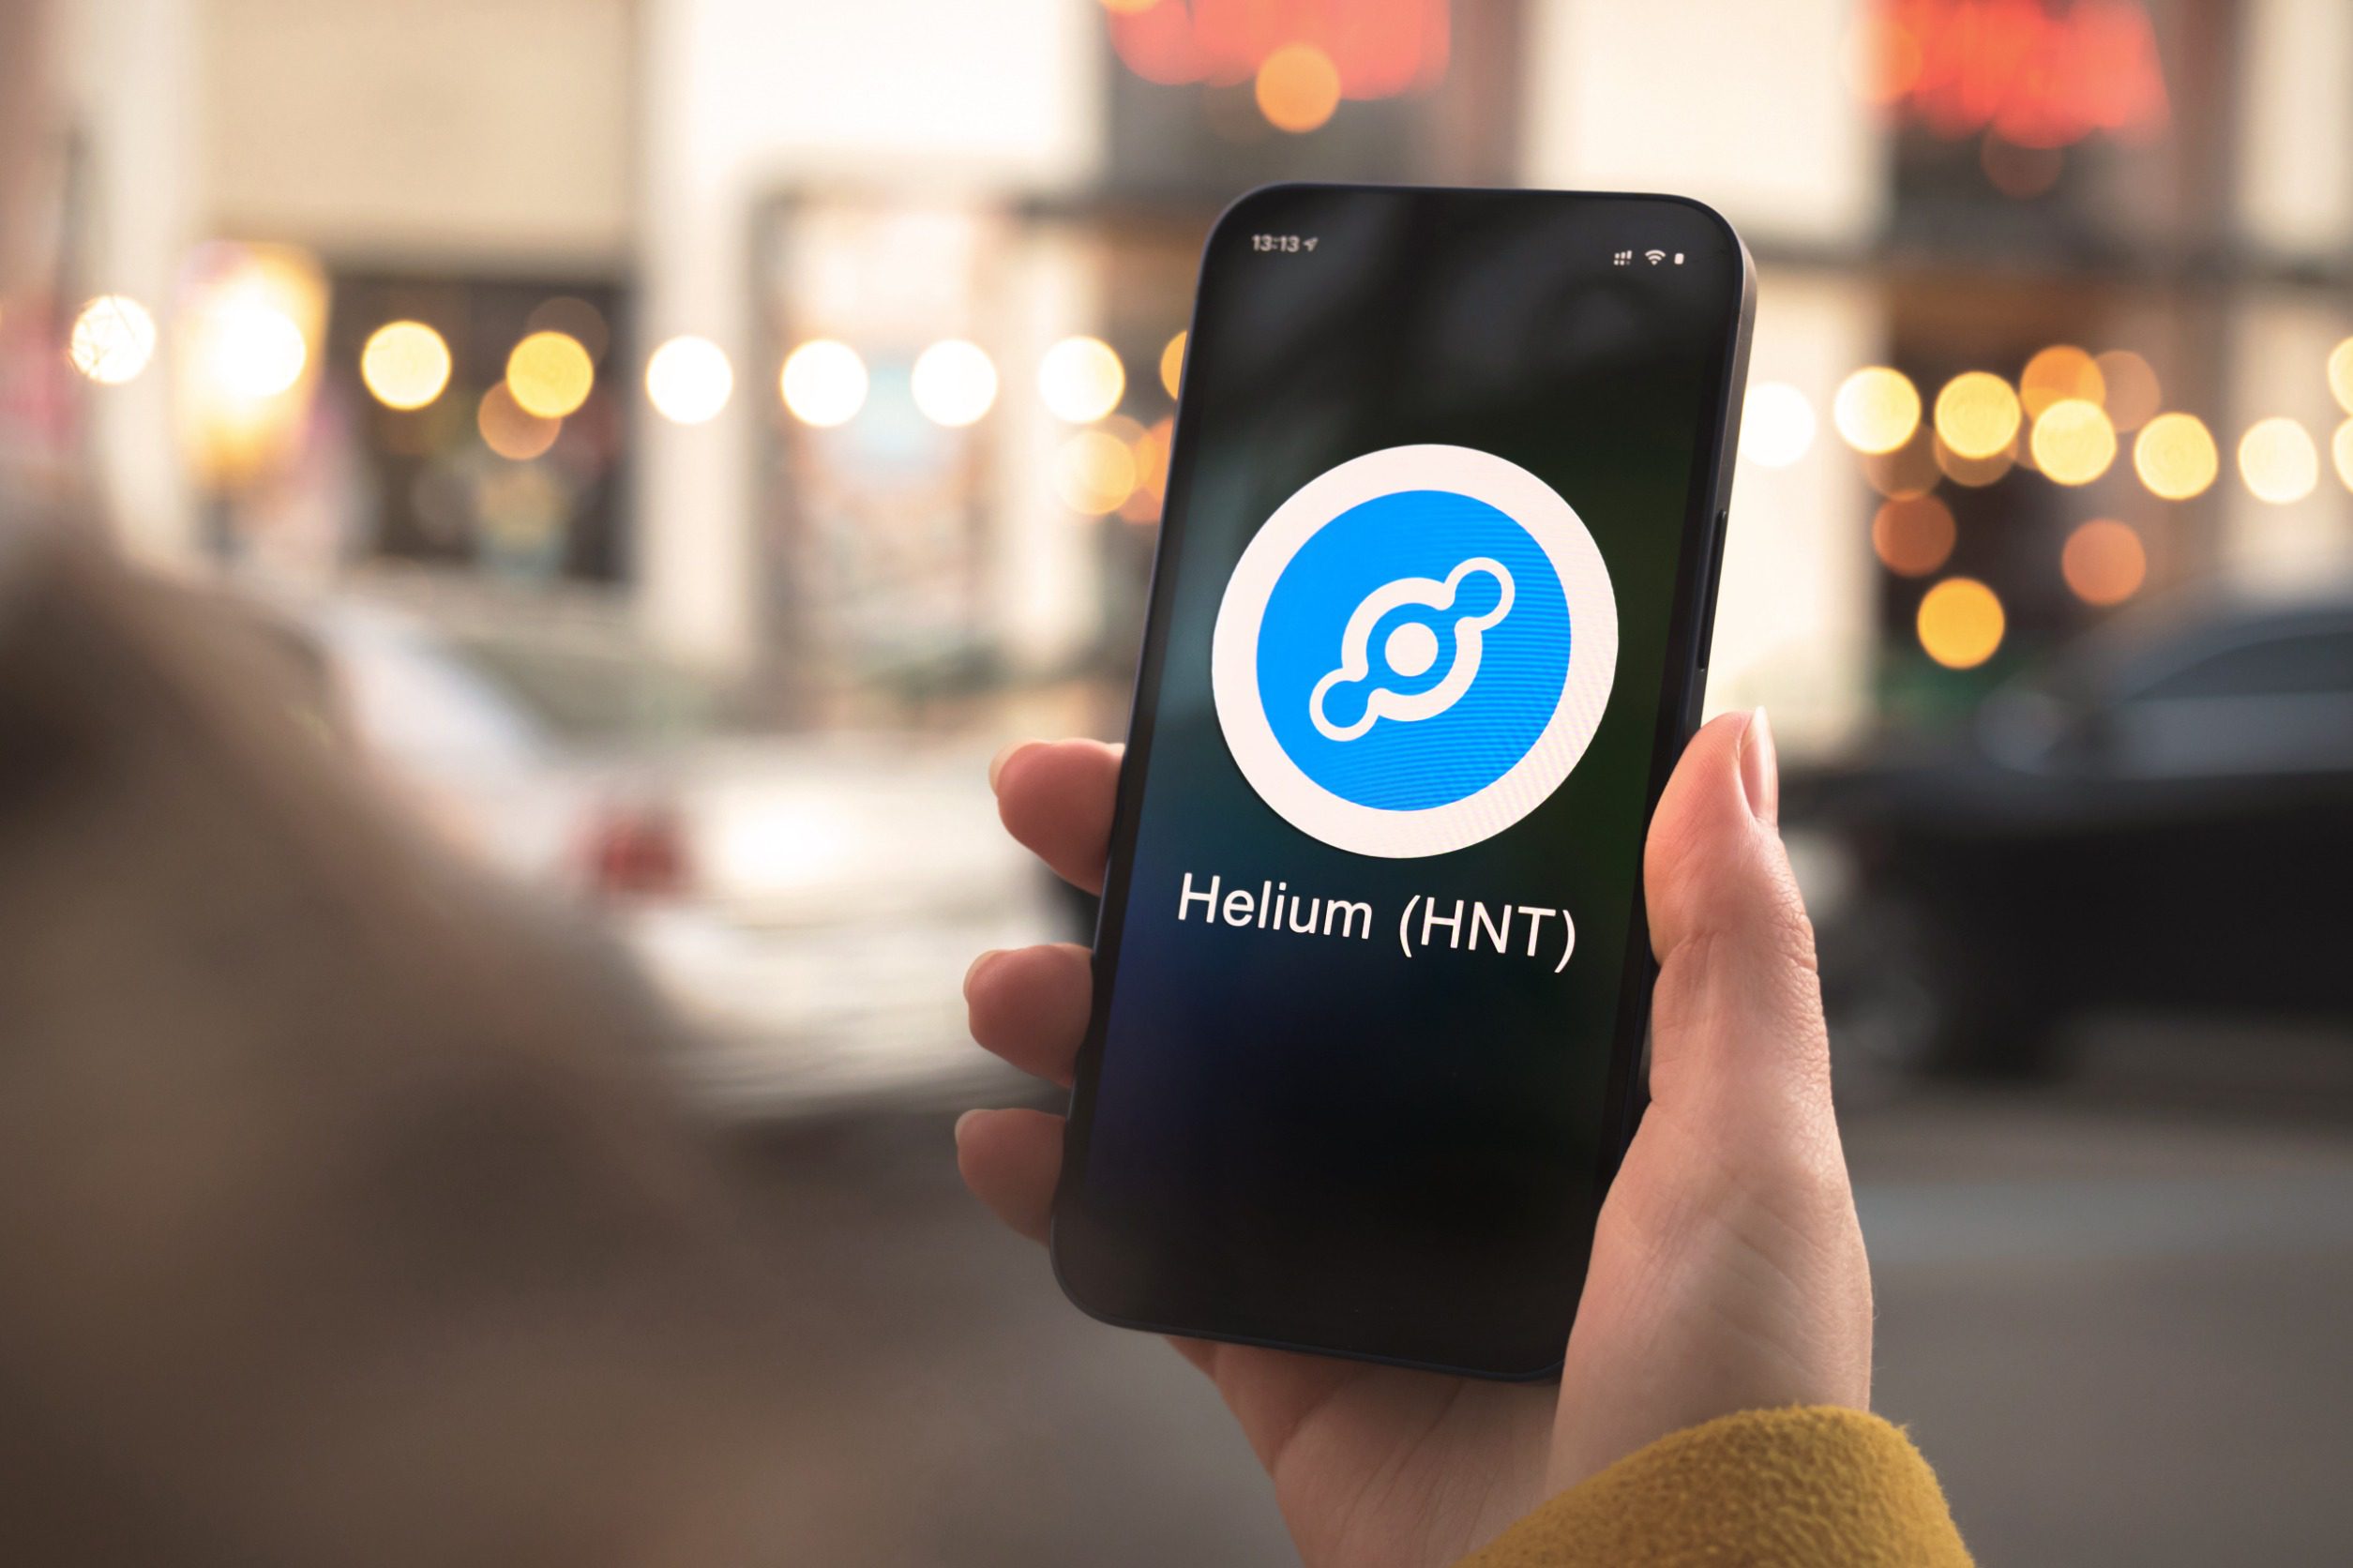 Helium Mobile unveils $20 unlimited plan in the US, integrating blockchain and 5G